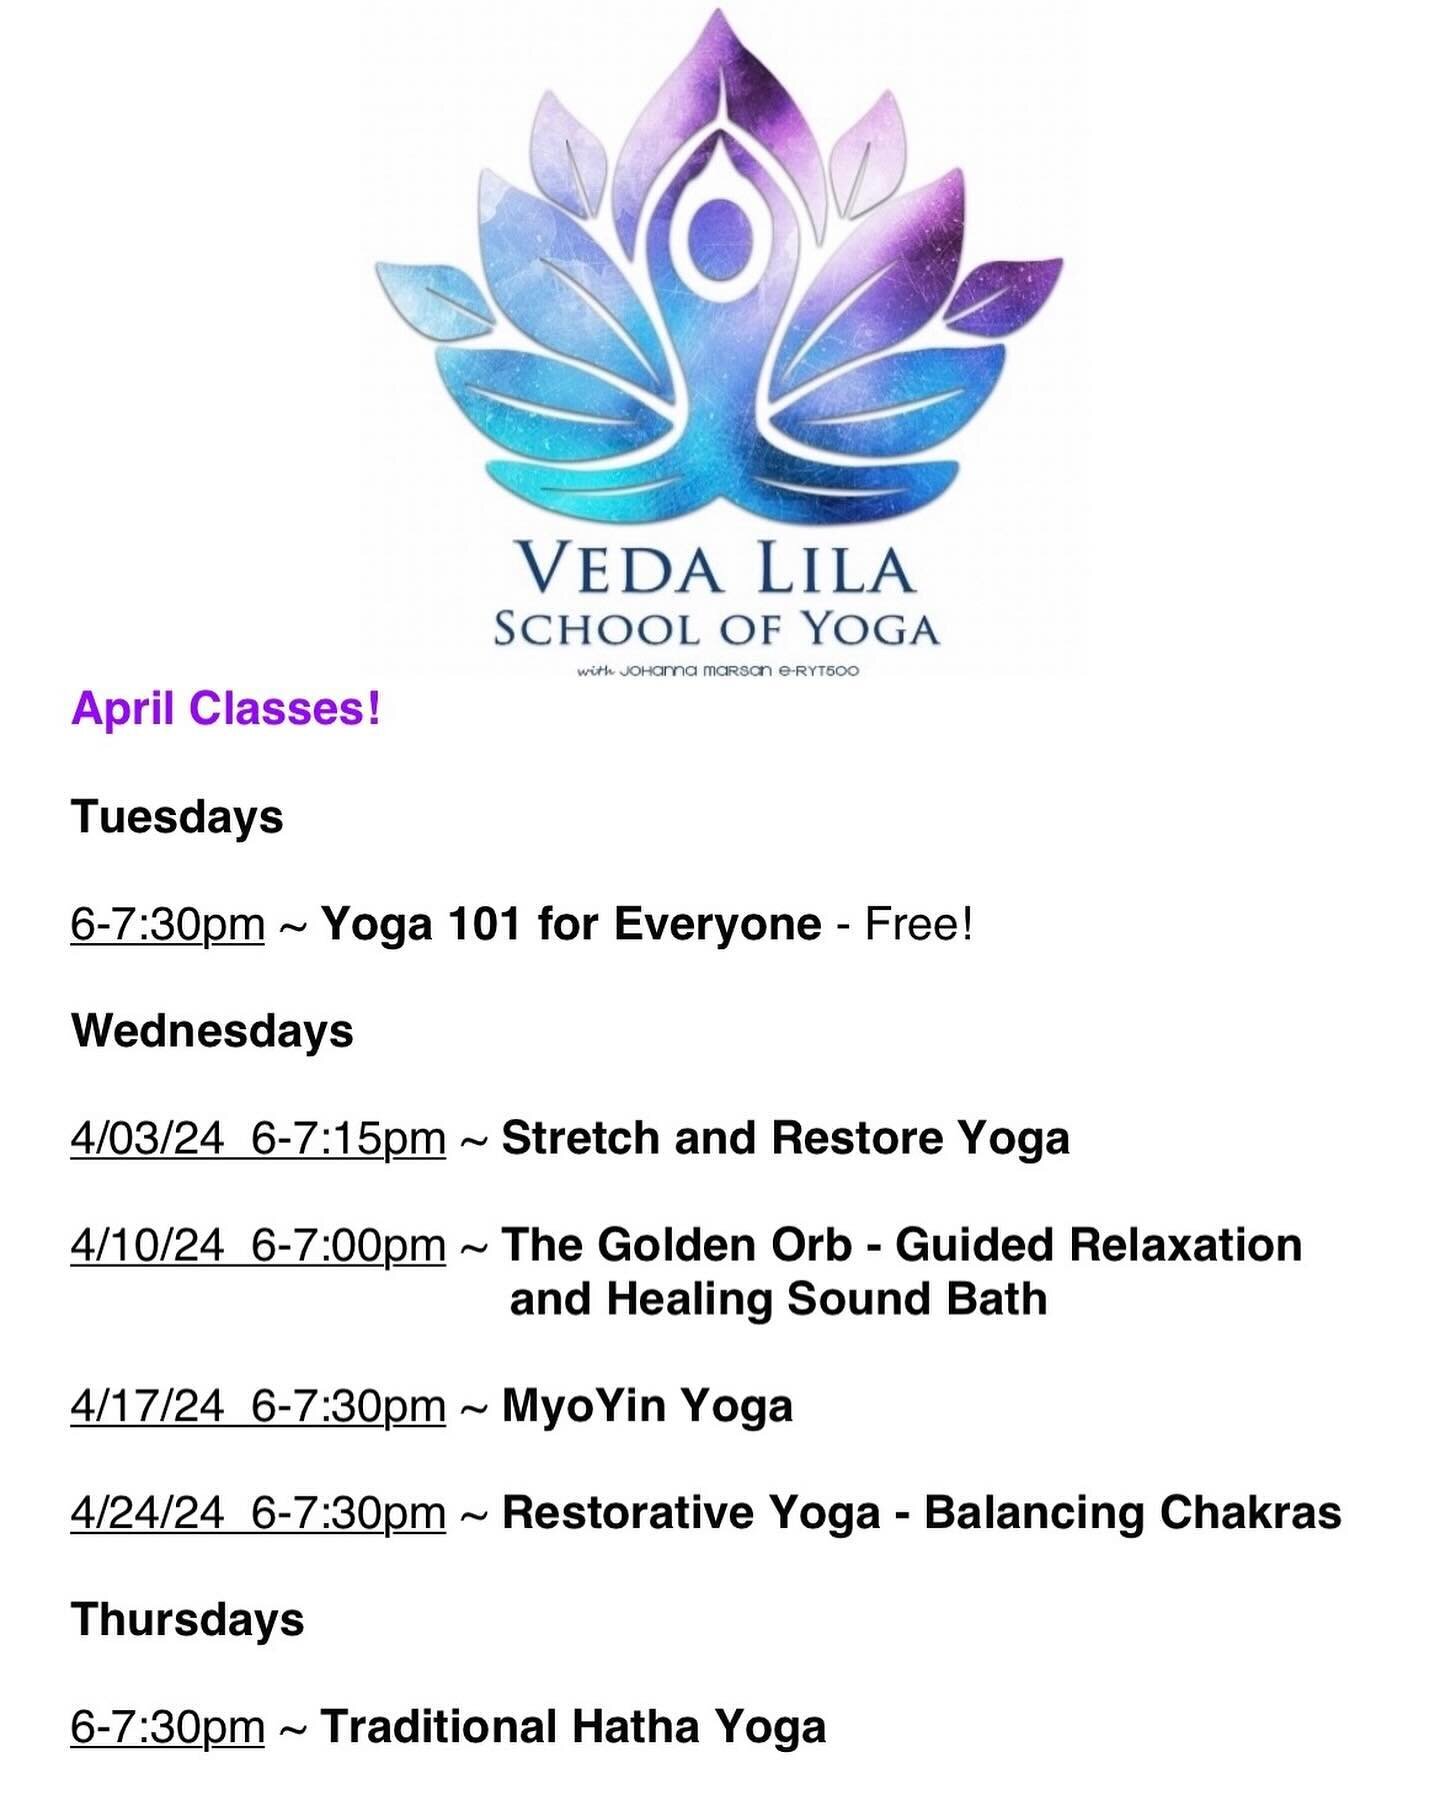 April Classes!

Tuesdays 

6-7:30pm ~ Yoga 101 for Everyone - Free ❤️🕊️!

Wednesdays

4/03/24  6-7:15pm ~ Stretch and Restore Yoga

4/10/24  6-7:00pm ~ The Golden Orb - Guided Relaxation and Healing Sound Bath

4/17/24  6-7:30pm ~ MyoYin Yoga

4/24/